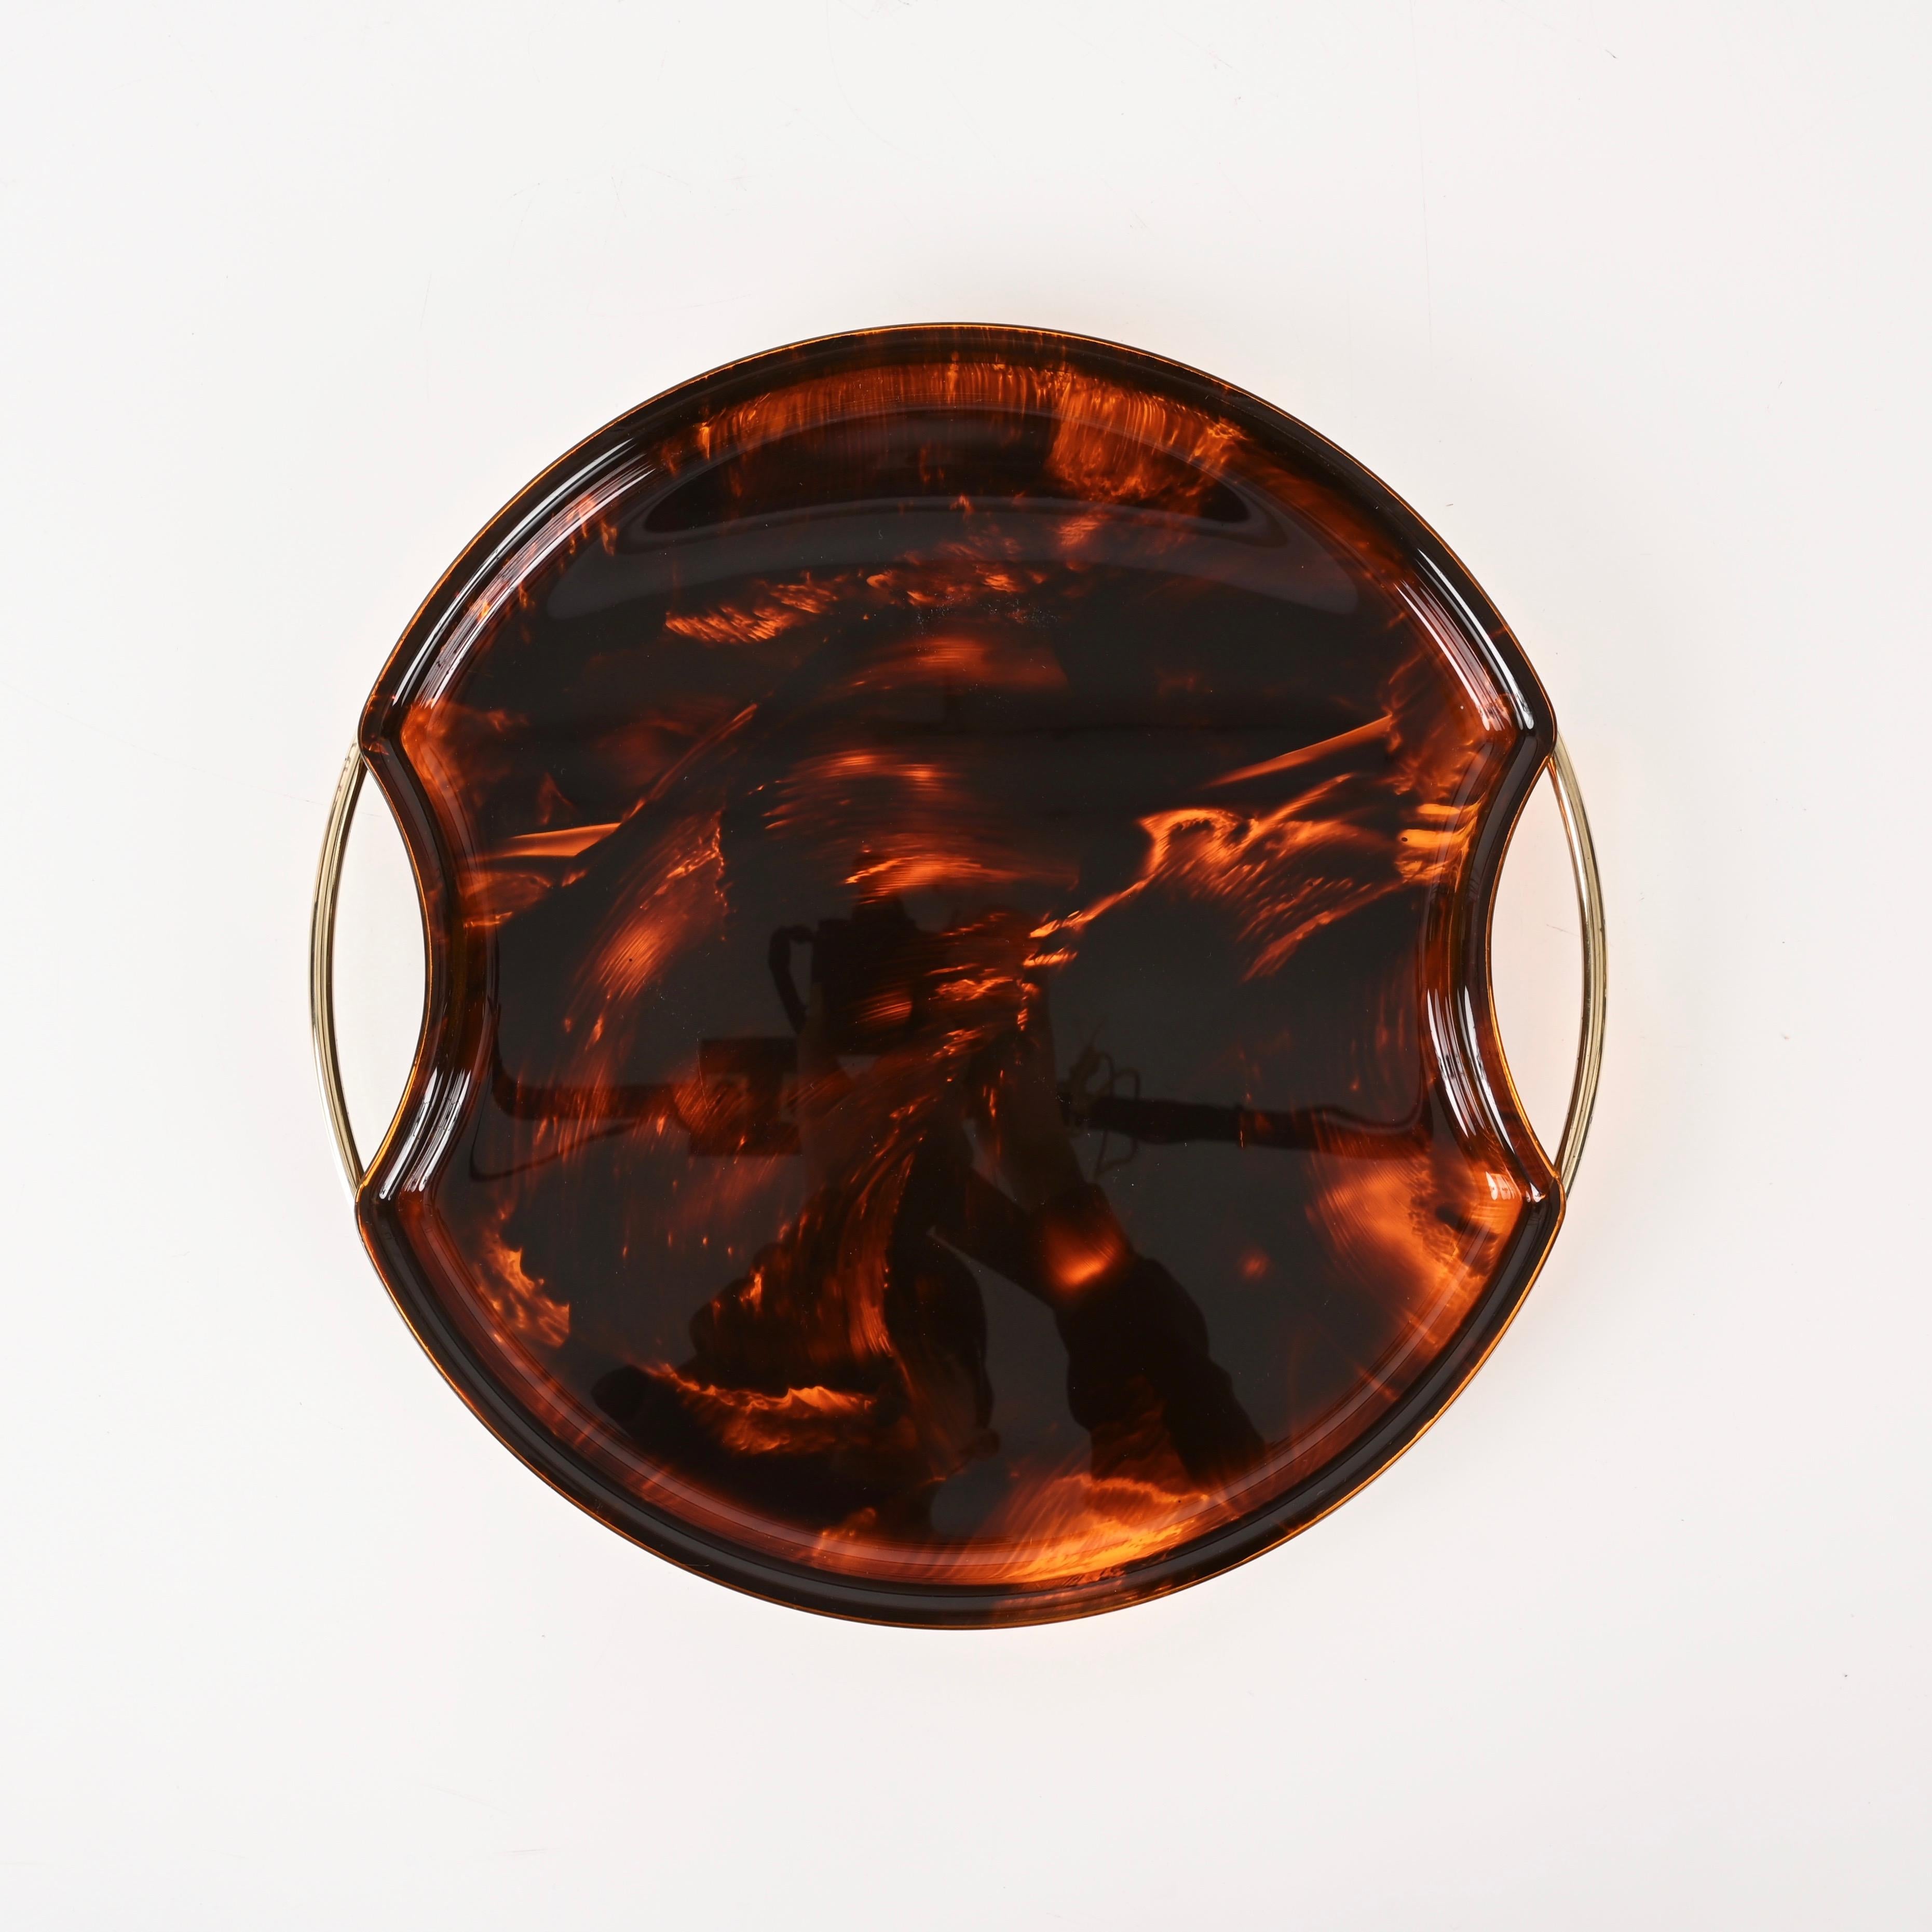 Hand-Crafted Mid-Century Tortoiseshell Lucite and Brass Serving Tray by Guzzini, Italy 1970s For Sale